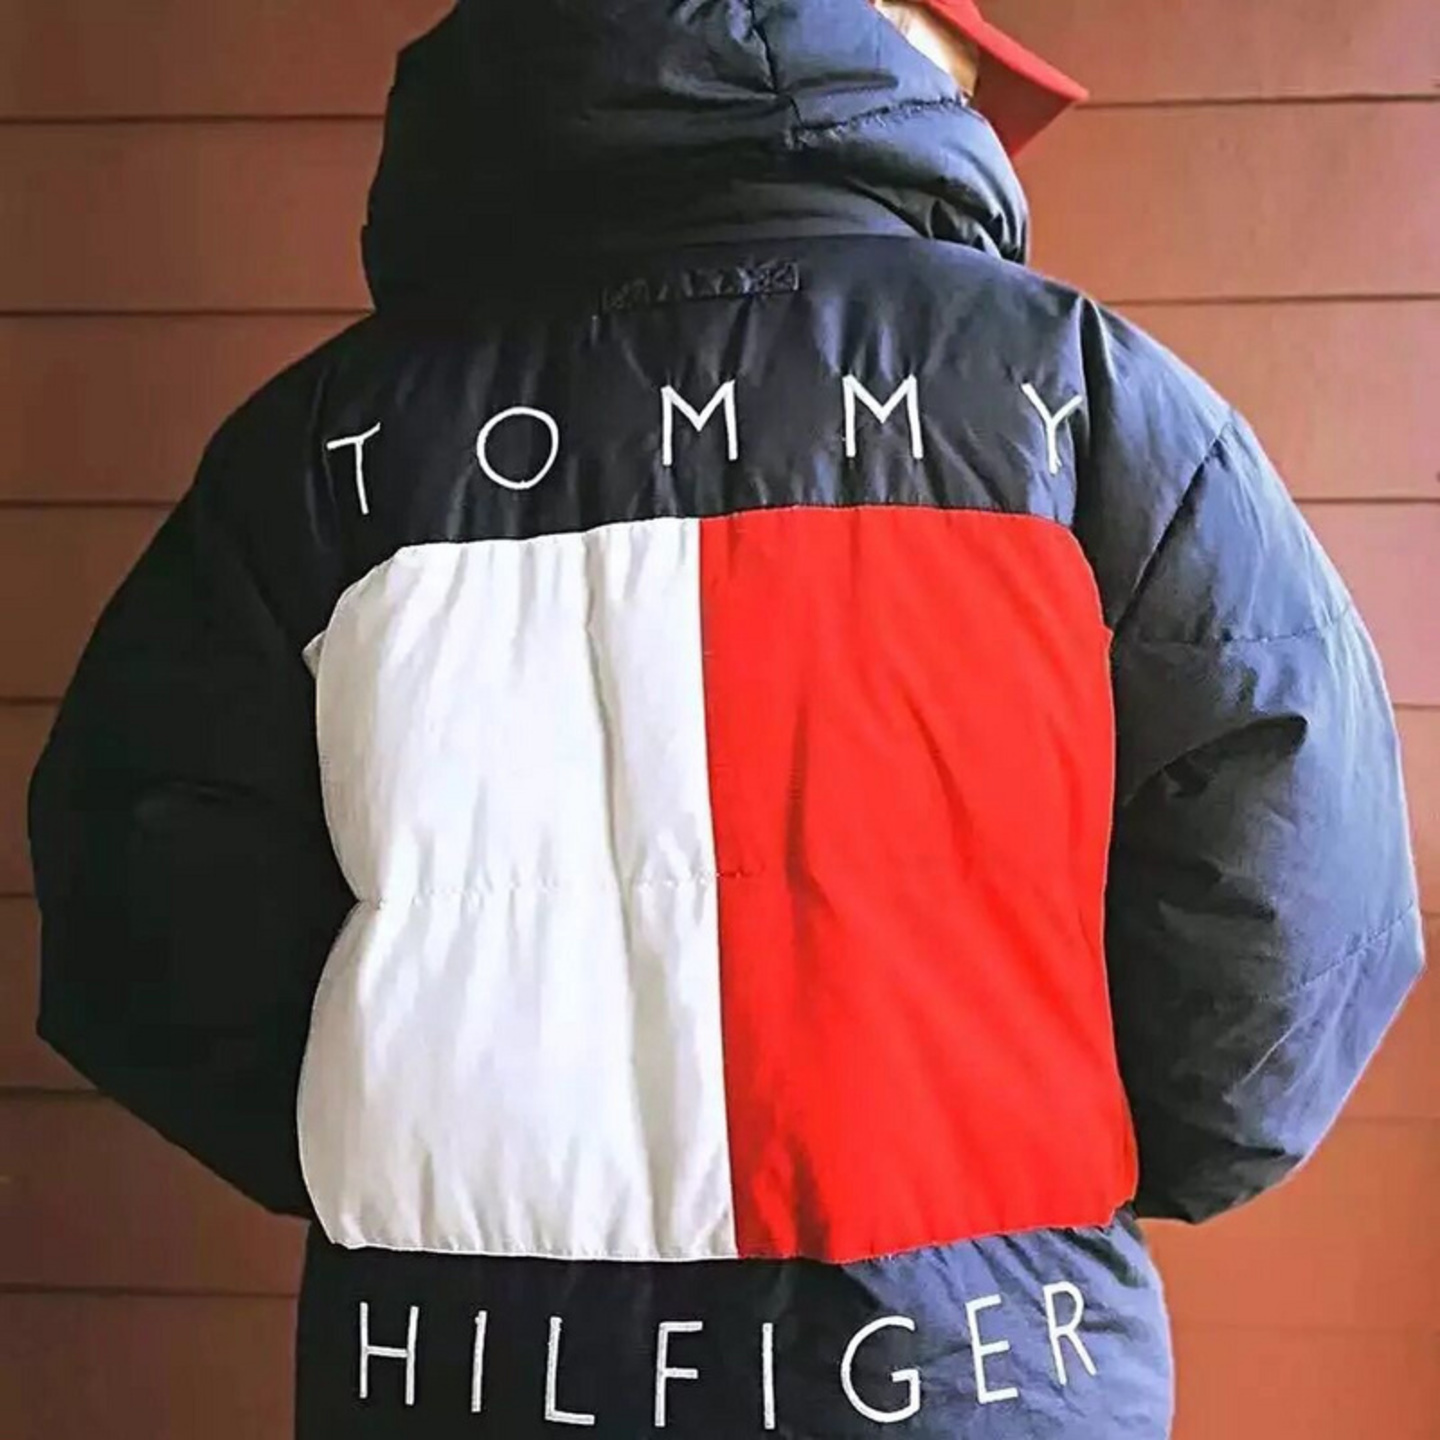 KITH x Tommy Hilfiger NYC Collaboration Down Jackets